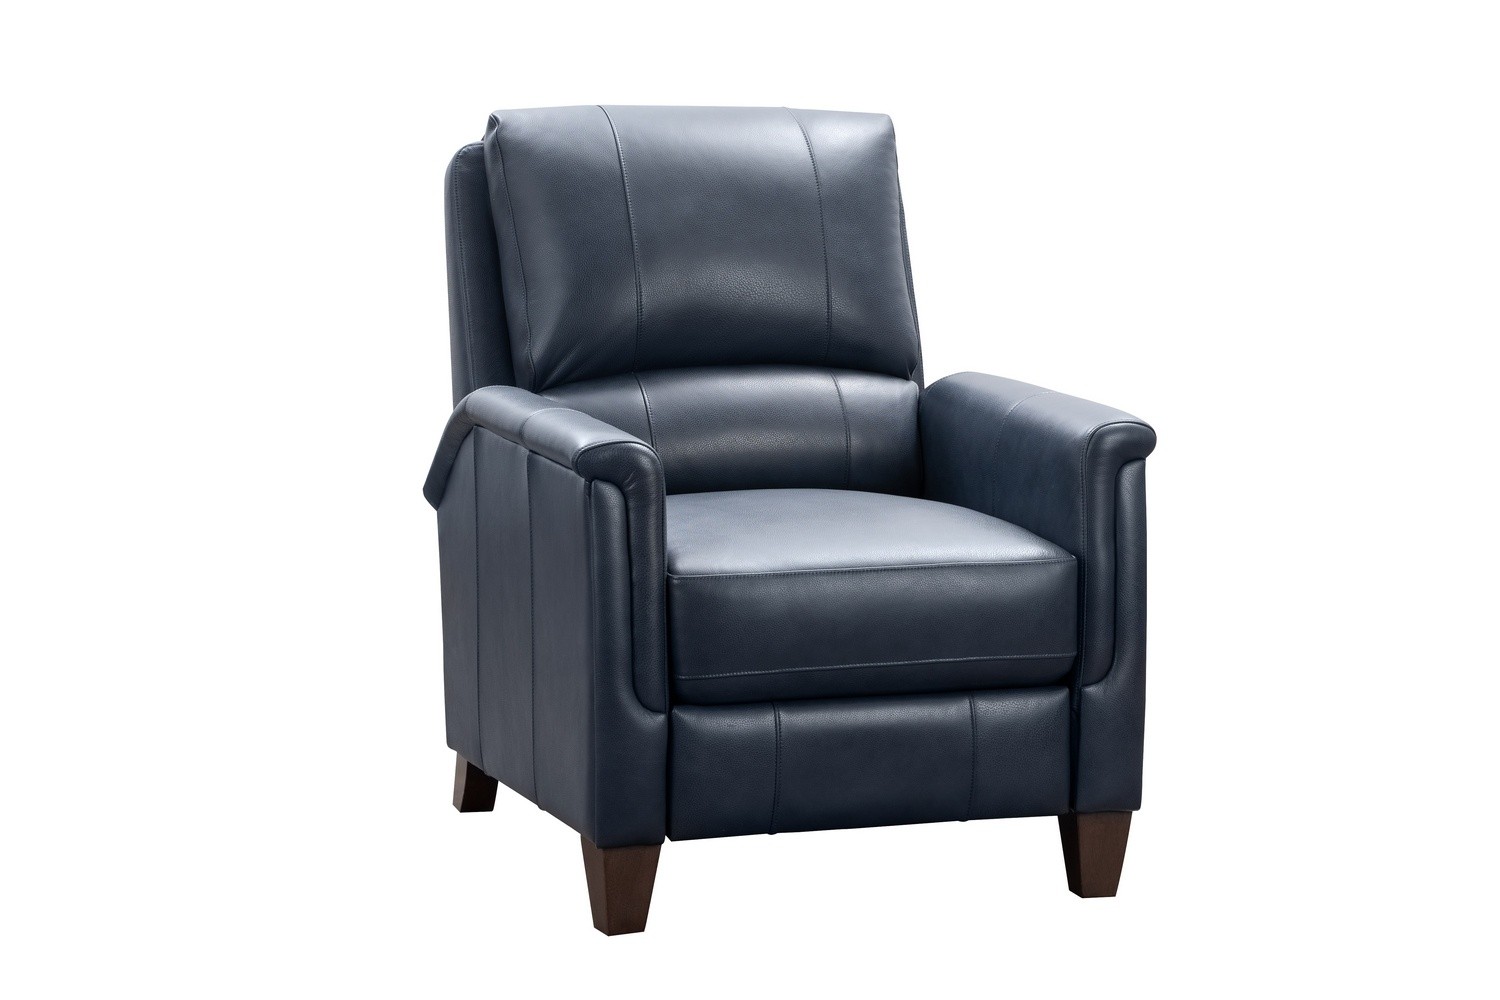 Barcalounger Quinn Recliner Chair - Barone Navy Blue/All Leather